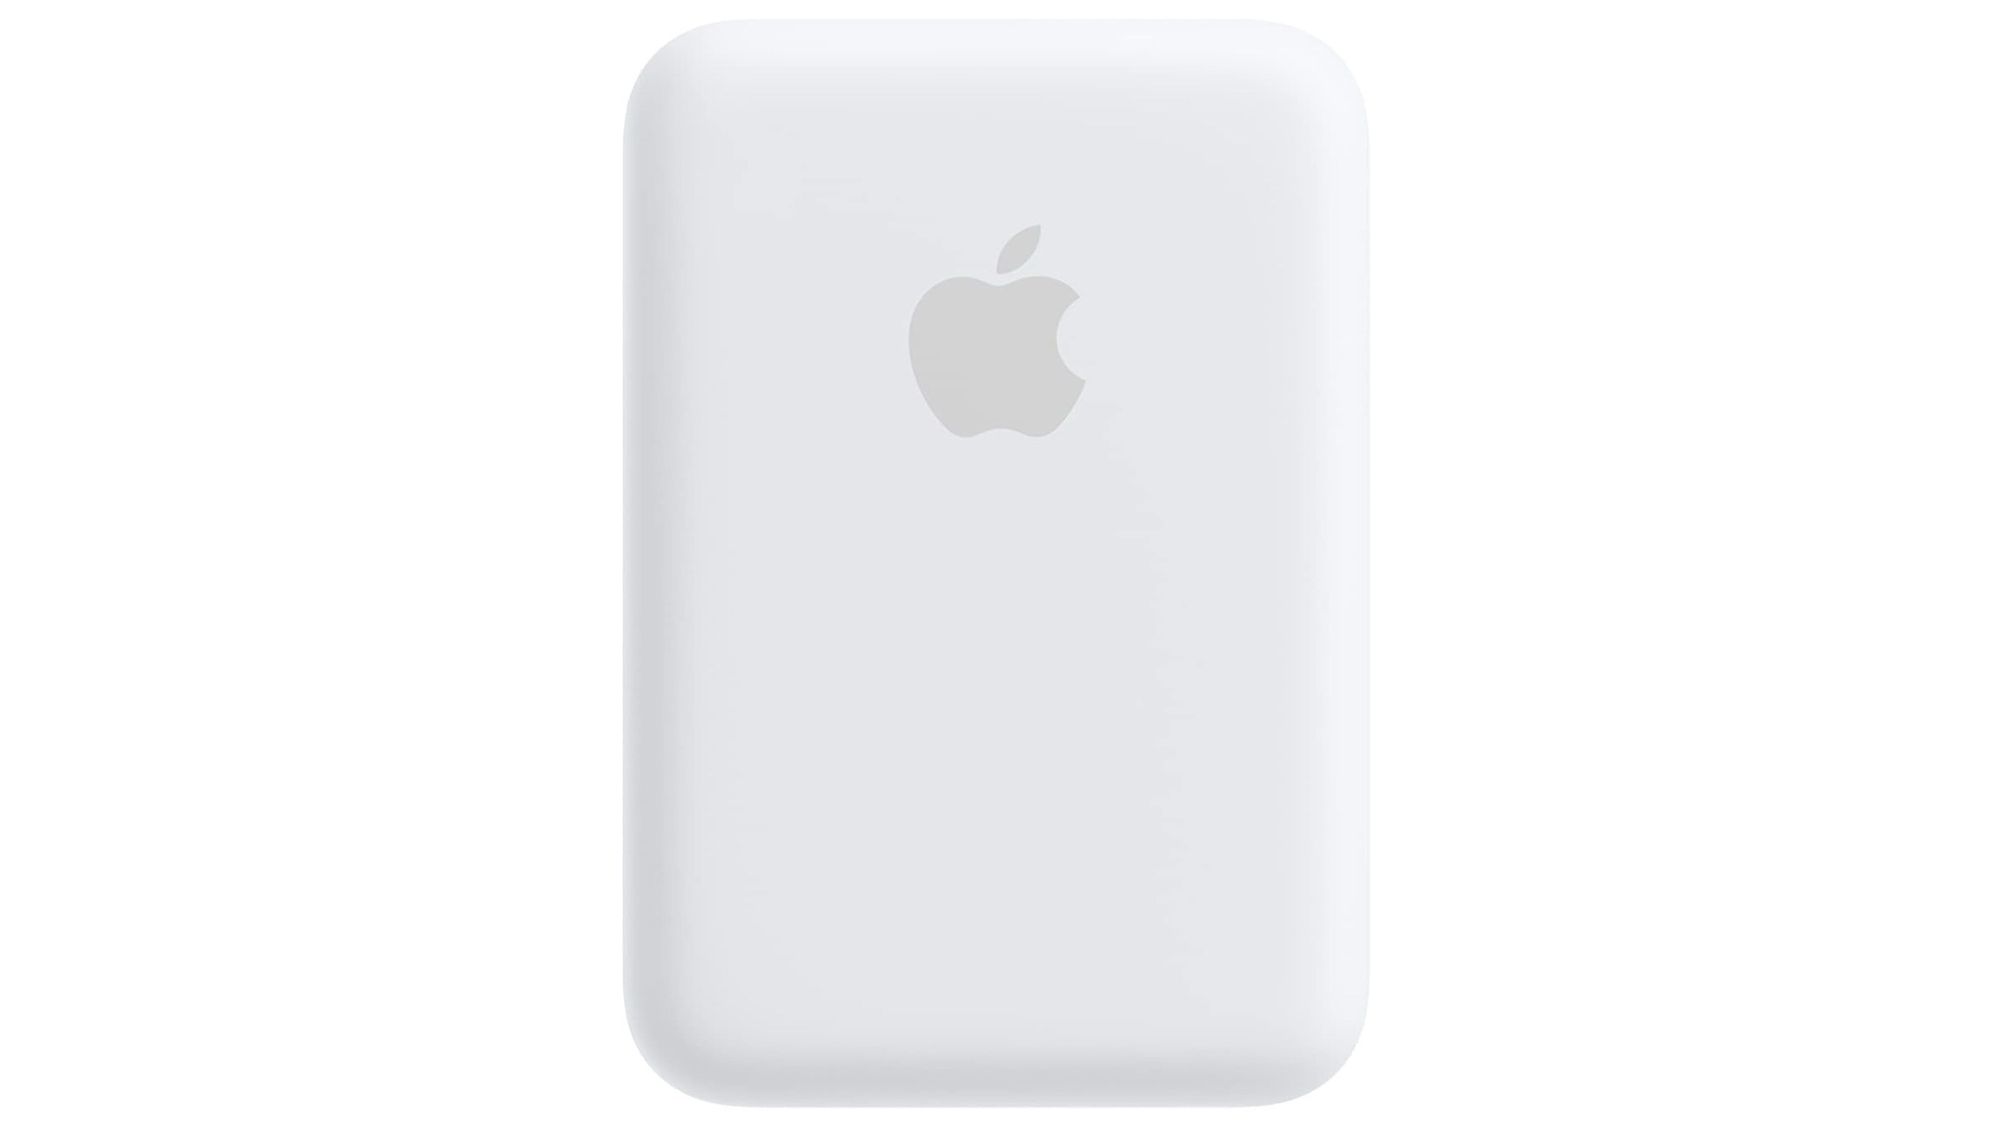 Apple MagSafe battery pack